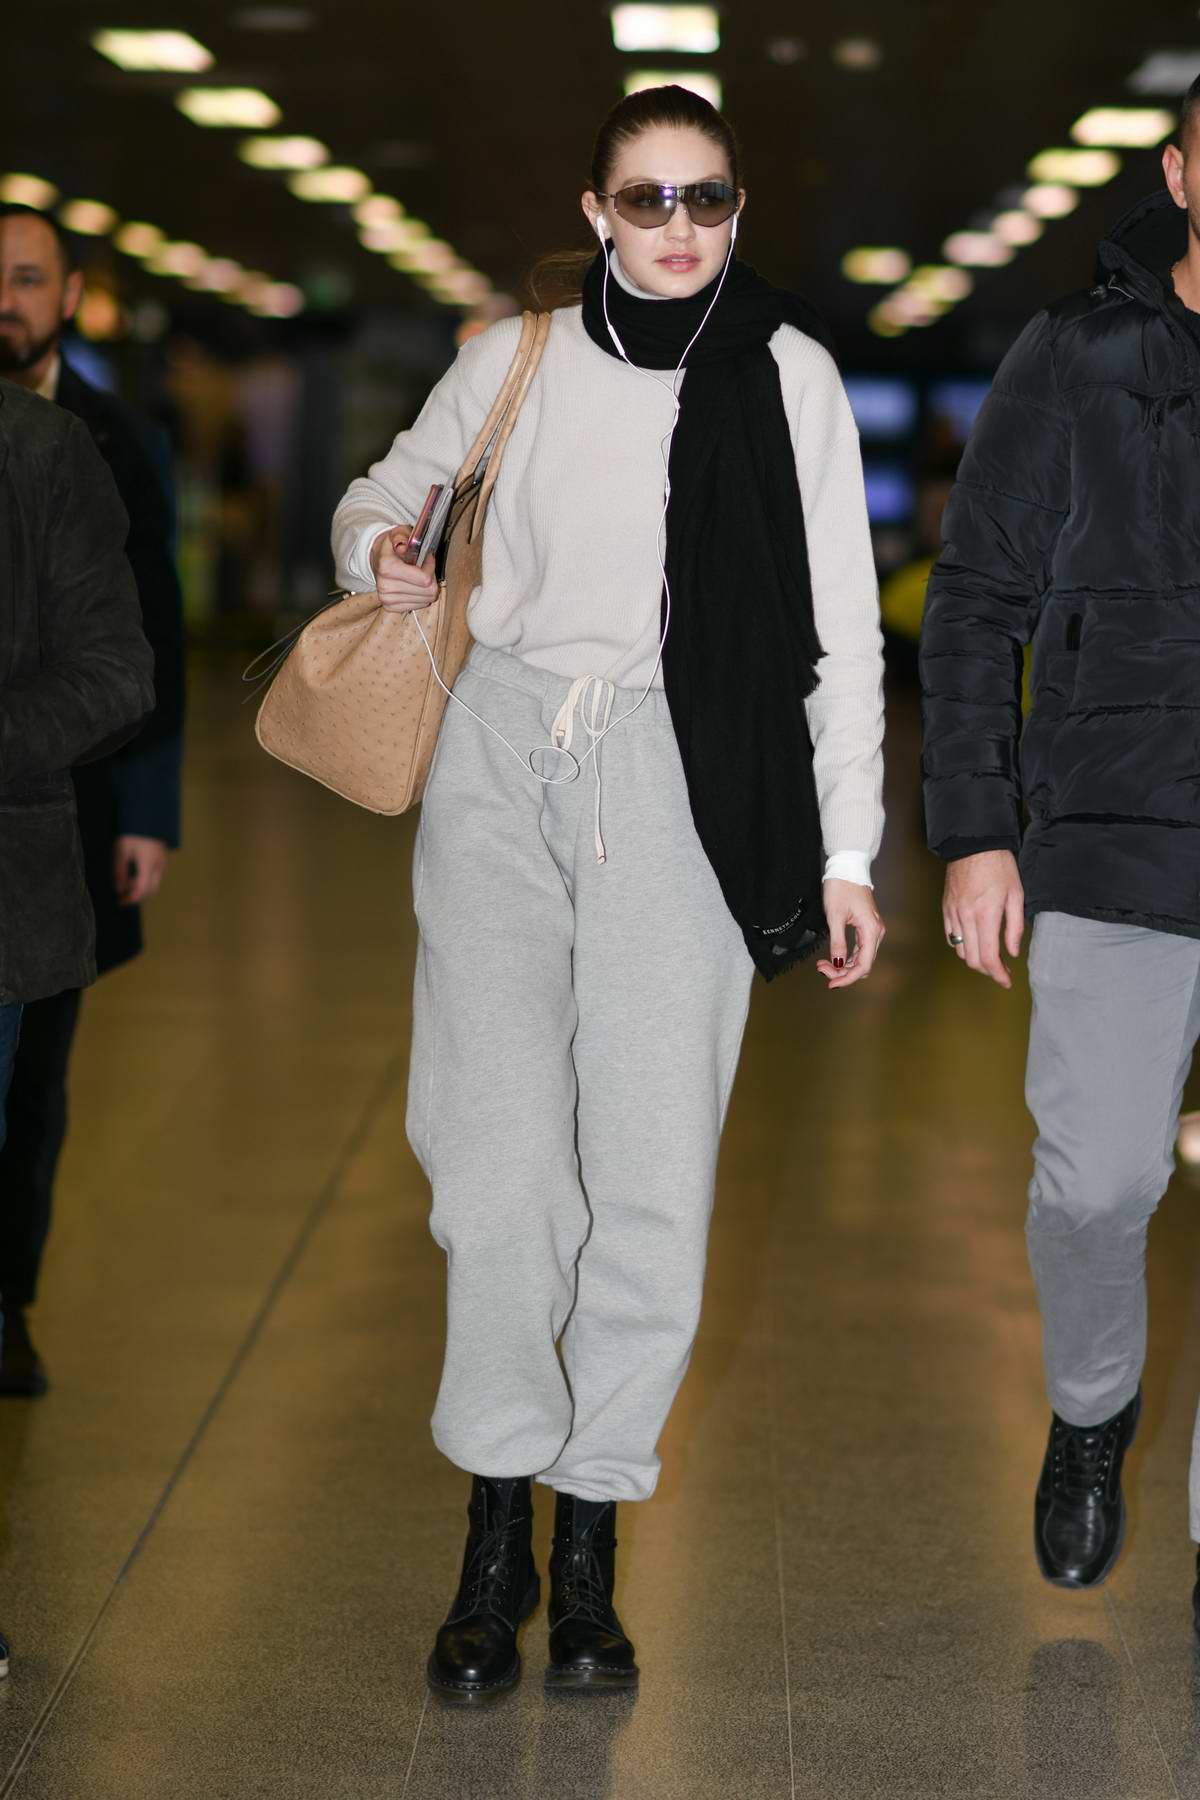 Zendaya arrives in a red hoodie at JFK Airport in New York City